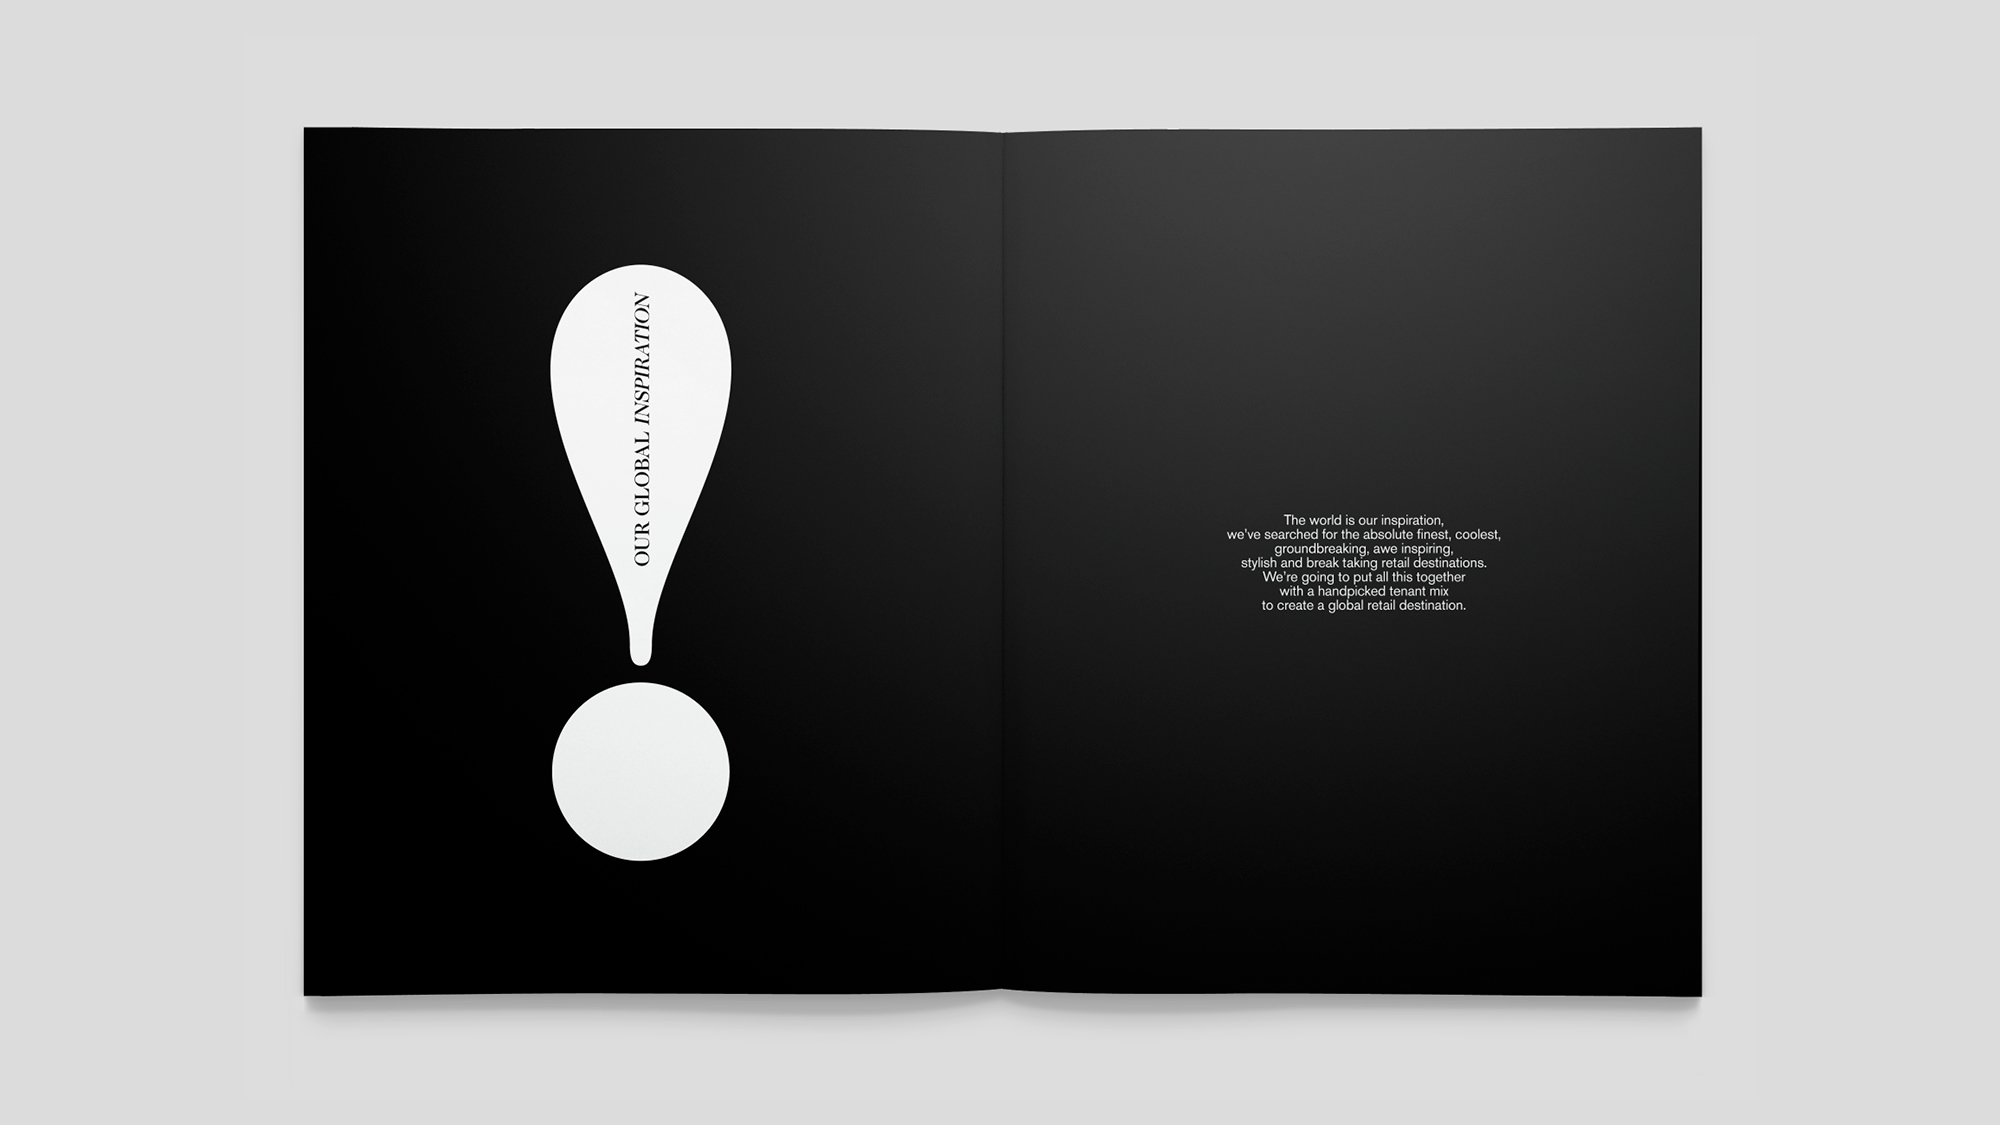 Entity-3-Three-Brand-Design-Agency-Sydney-Transport-for-London-Vision-8-experience-print-book-spread-type